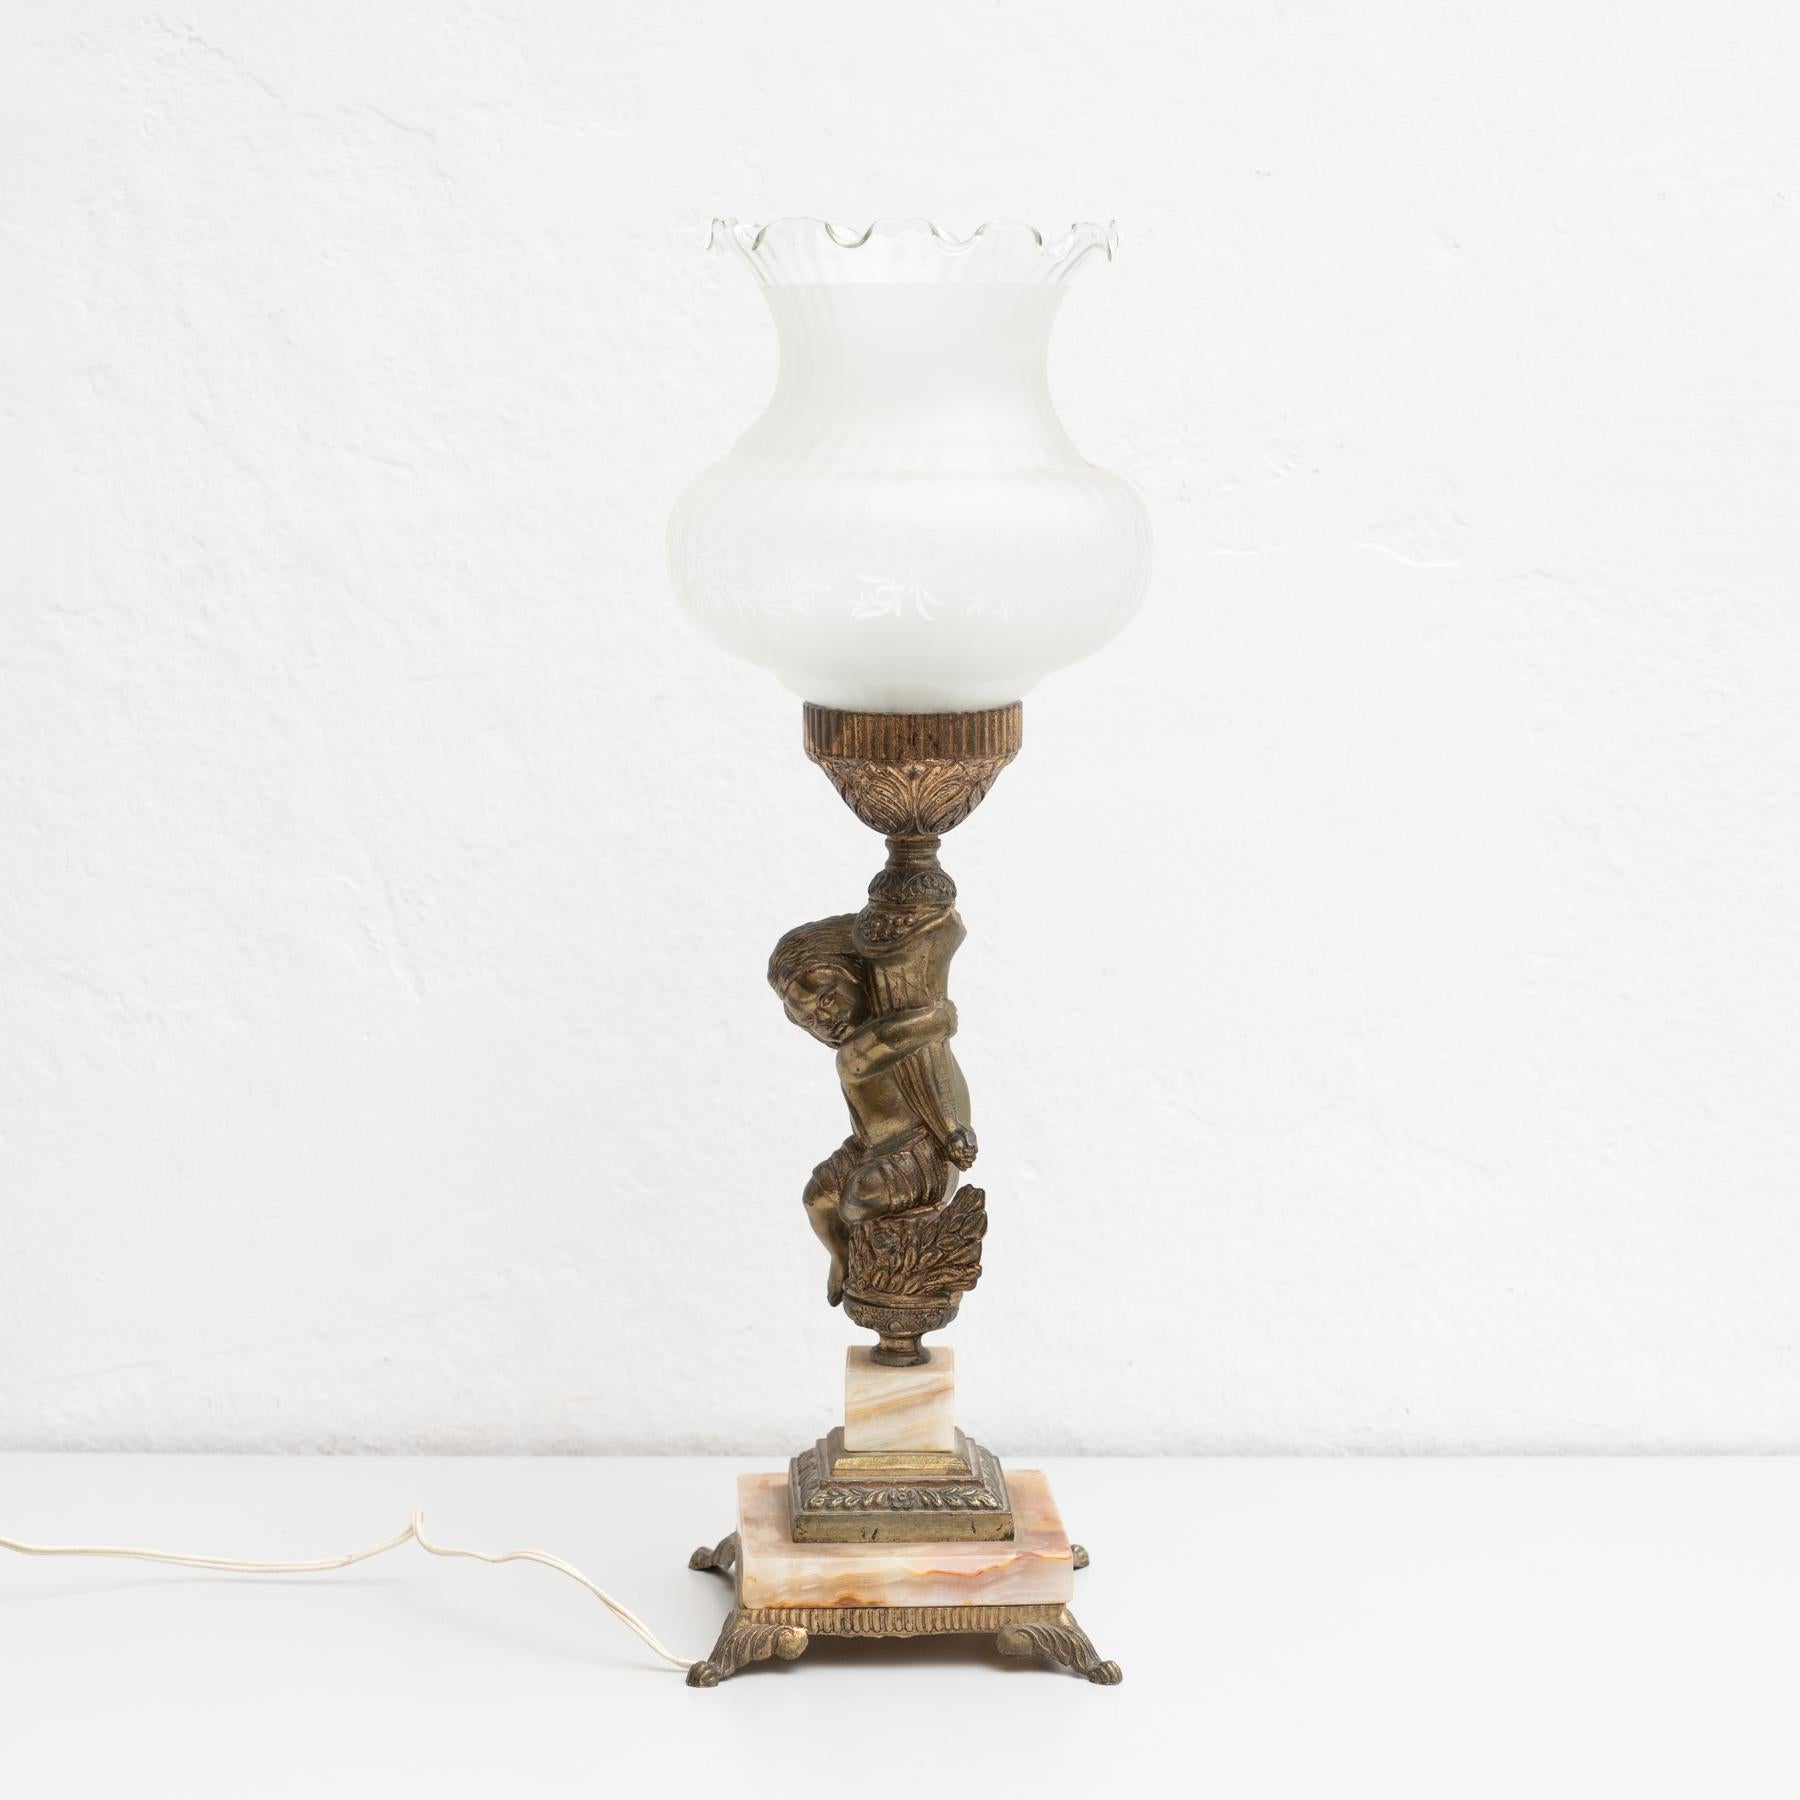 Early 20th century table lamp, with a beautiful decoration of a hugging child.

Manufactured by unknown designer in Spain.

In original condition, with minor wear consistent with age and use, preserving a beautiful